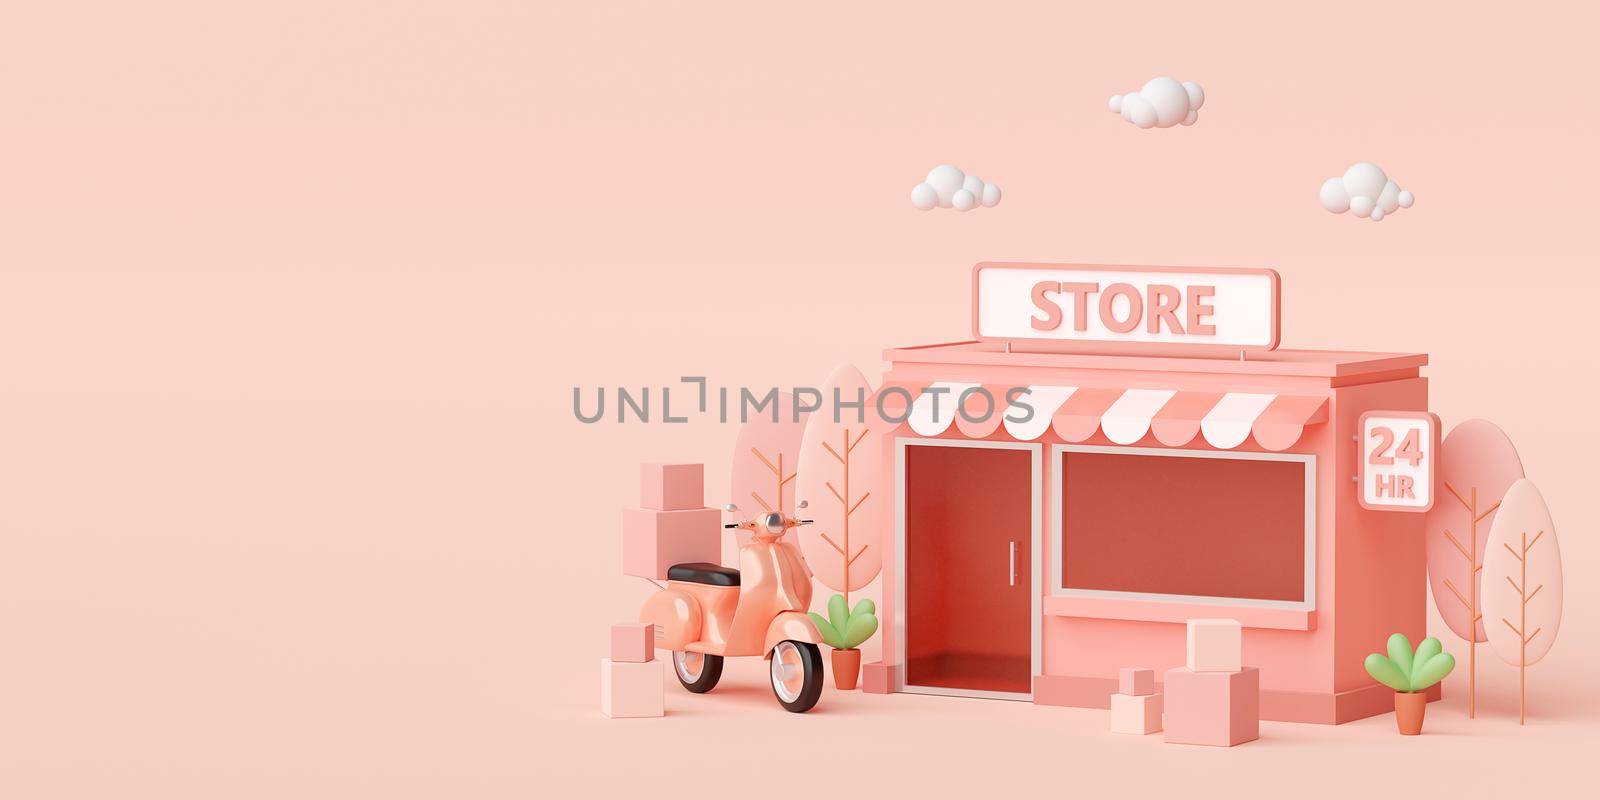 E-commerce concept, Convenience store and delivery service by scooter, 3d illustration